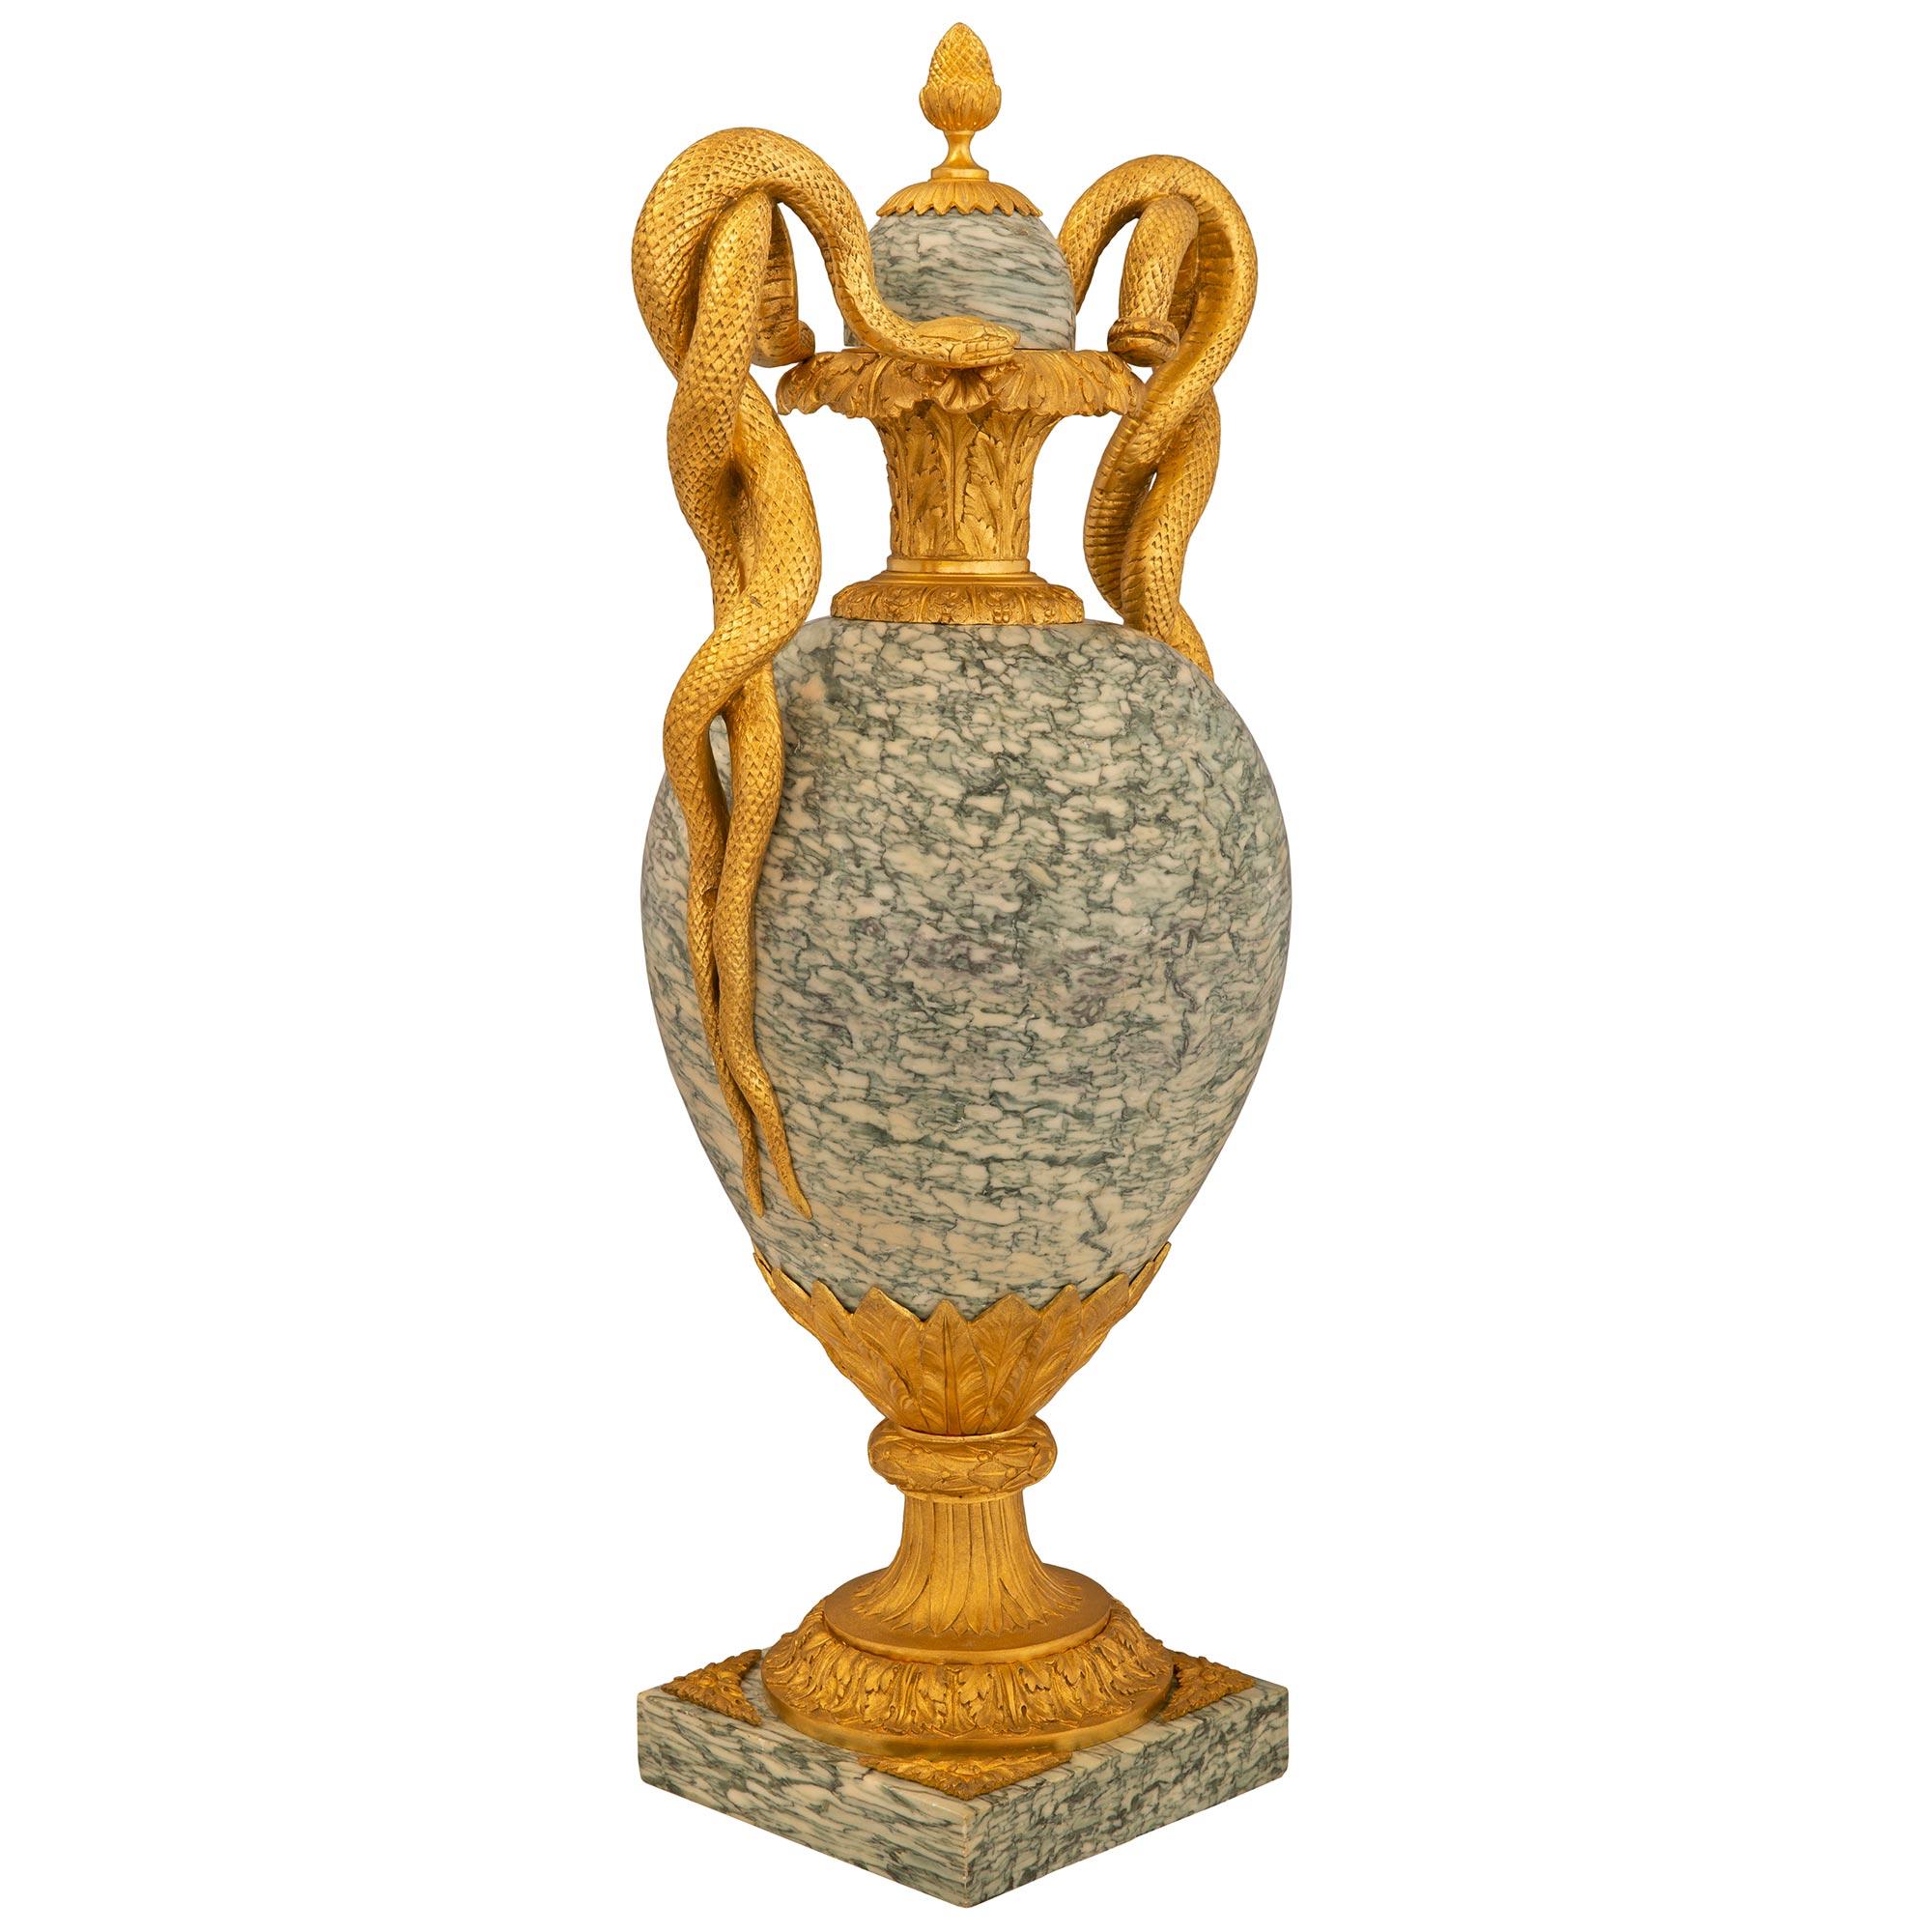 A stunning and very high quality pair of French 19th century Louis XVI st. Belle Époque period ormolu and Vert Campan marble lidded urns. Each urn is raised by a square Vert Campan marble base with fine foliate accents and a most elegant socle